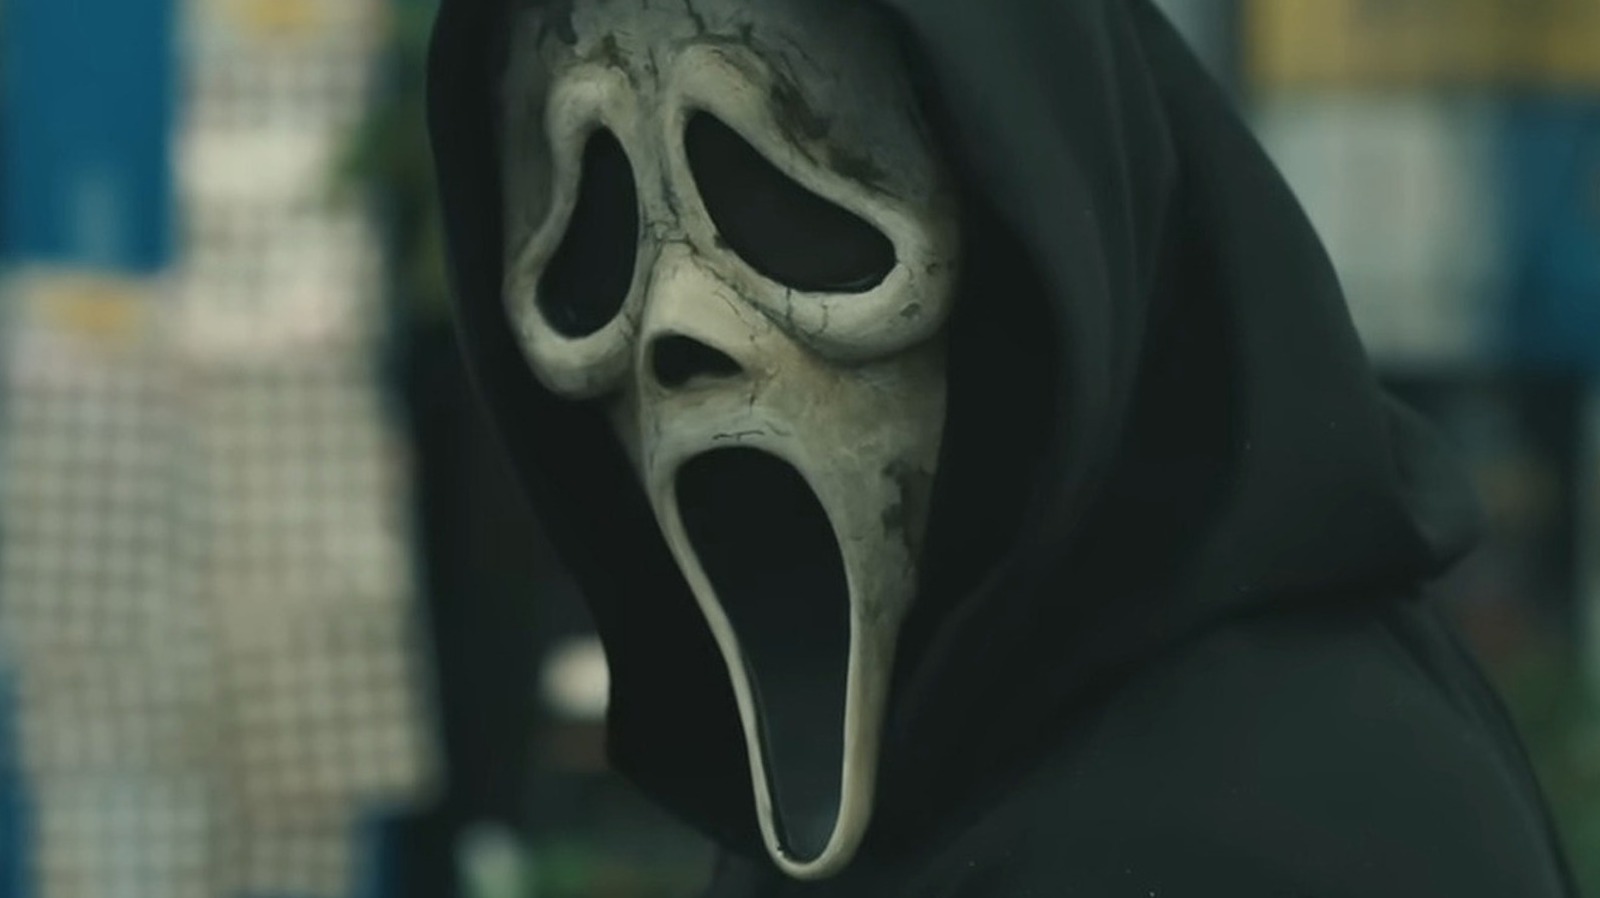 Mortal Kombat 1 is getting Scream's Ghostface as DLC, as well as